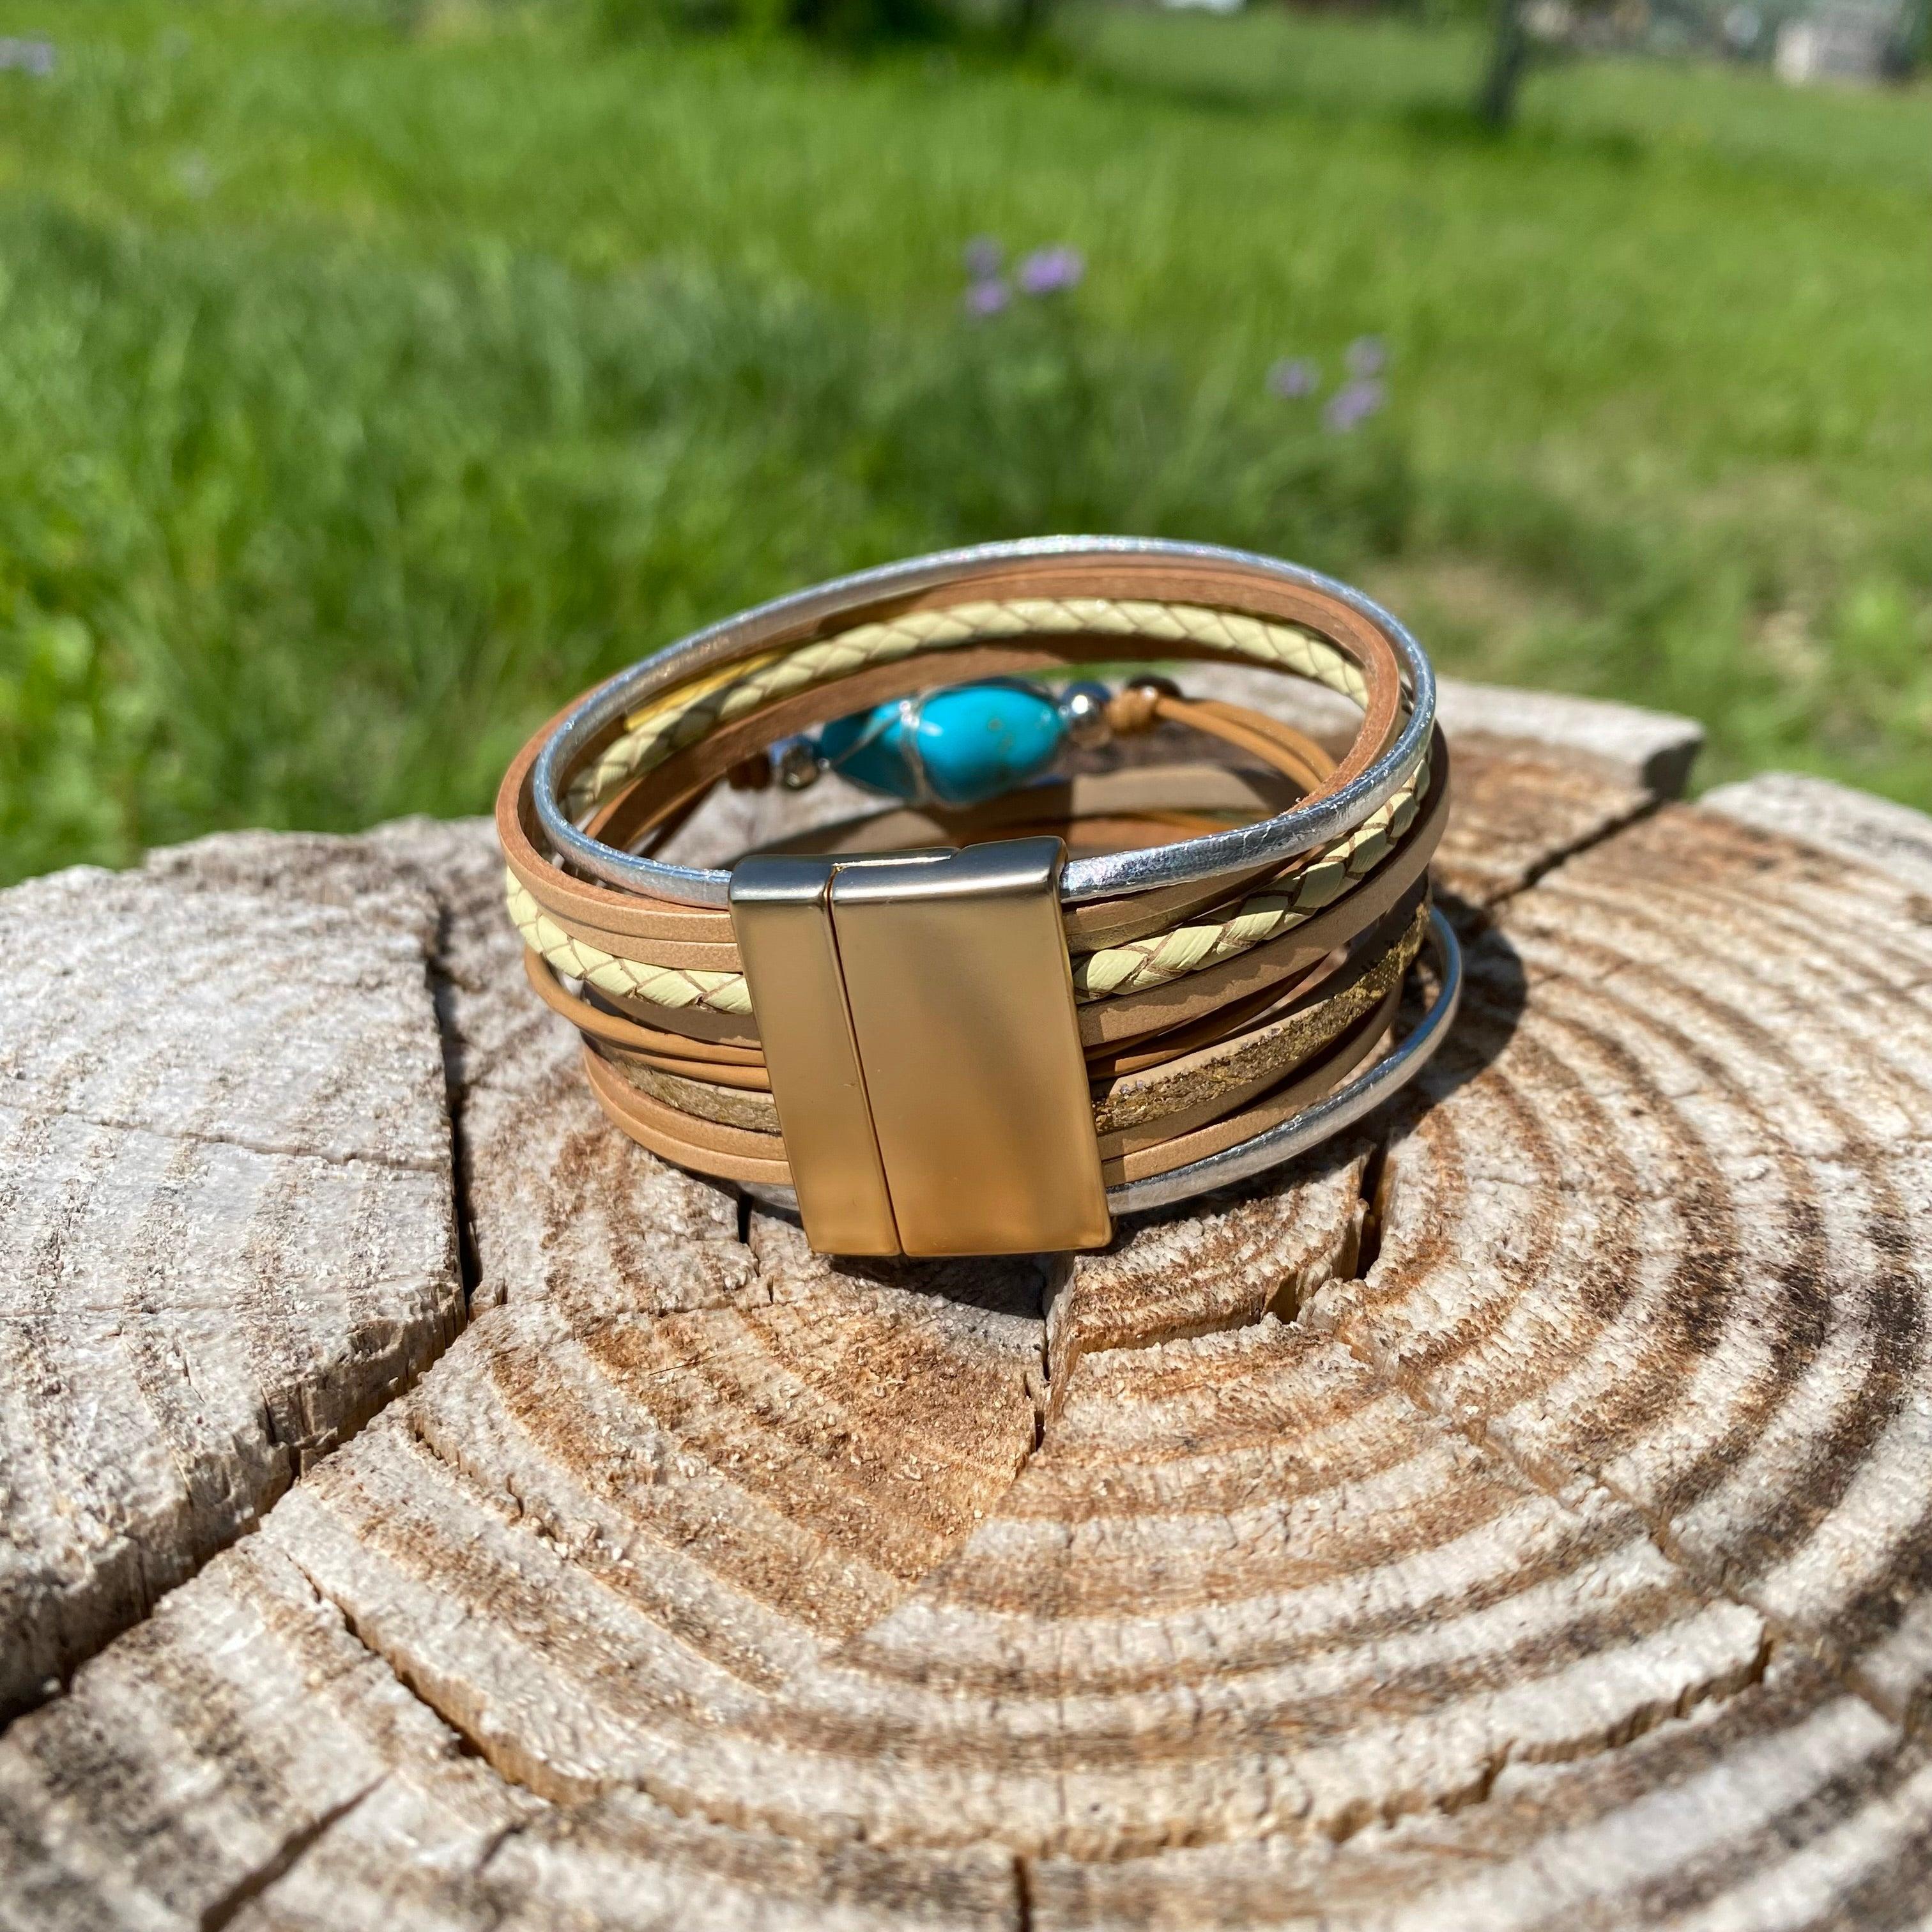 Tan Leather and Turquoise Stone Fashion Bracelet XI116 - RODEO DRIVE